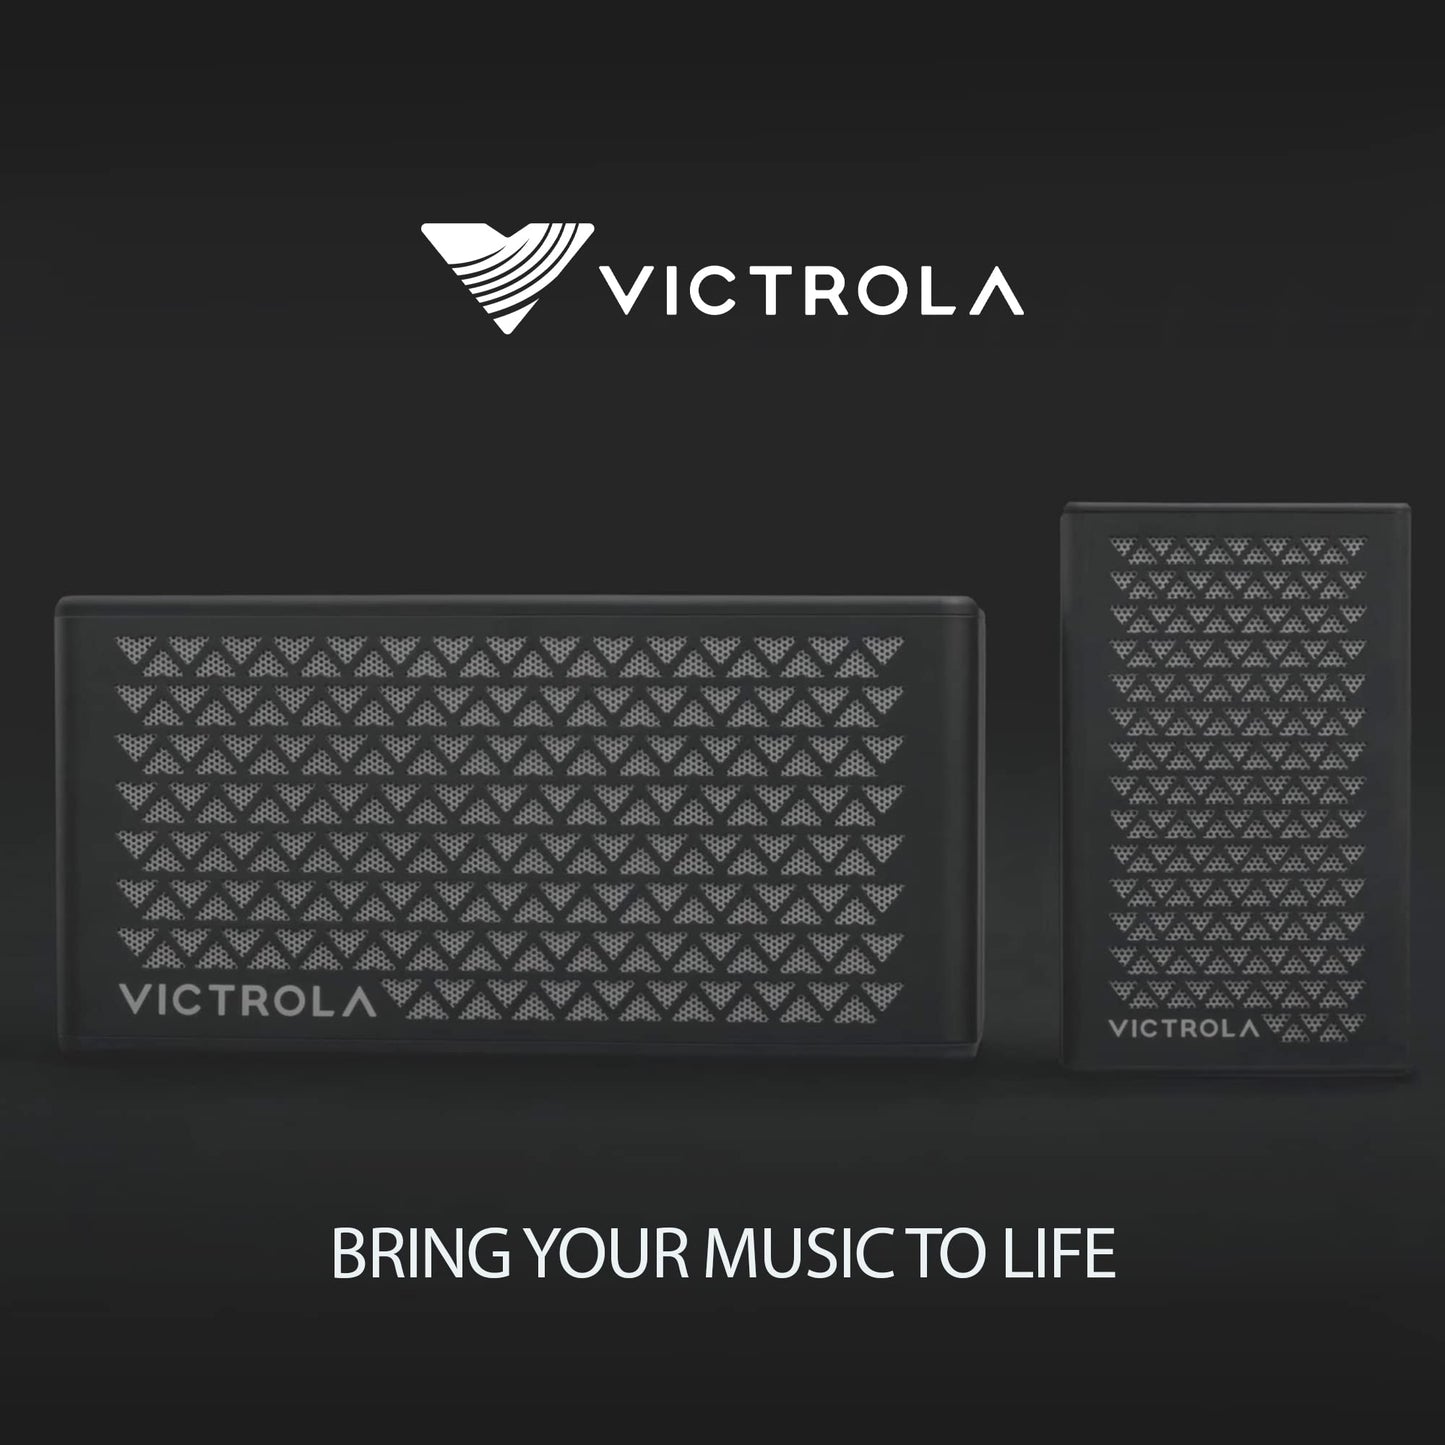 VICTROLA Music Edition 1 Portable Bluetooth Speaker, IP67 Water and Dust Resistant, 12 Hour Battery Life, Multi-Speaker Pairing, Premium Sound and Passive Bass Radiator, Black